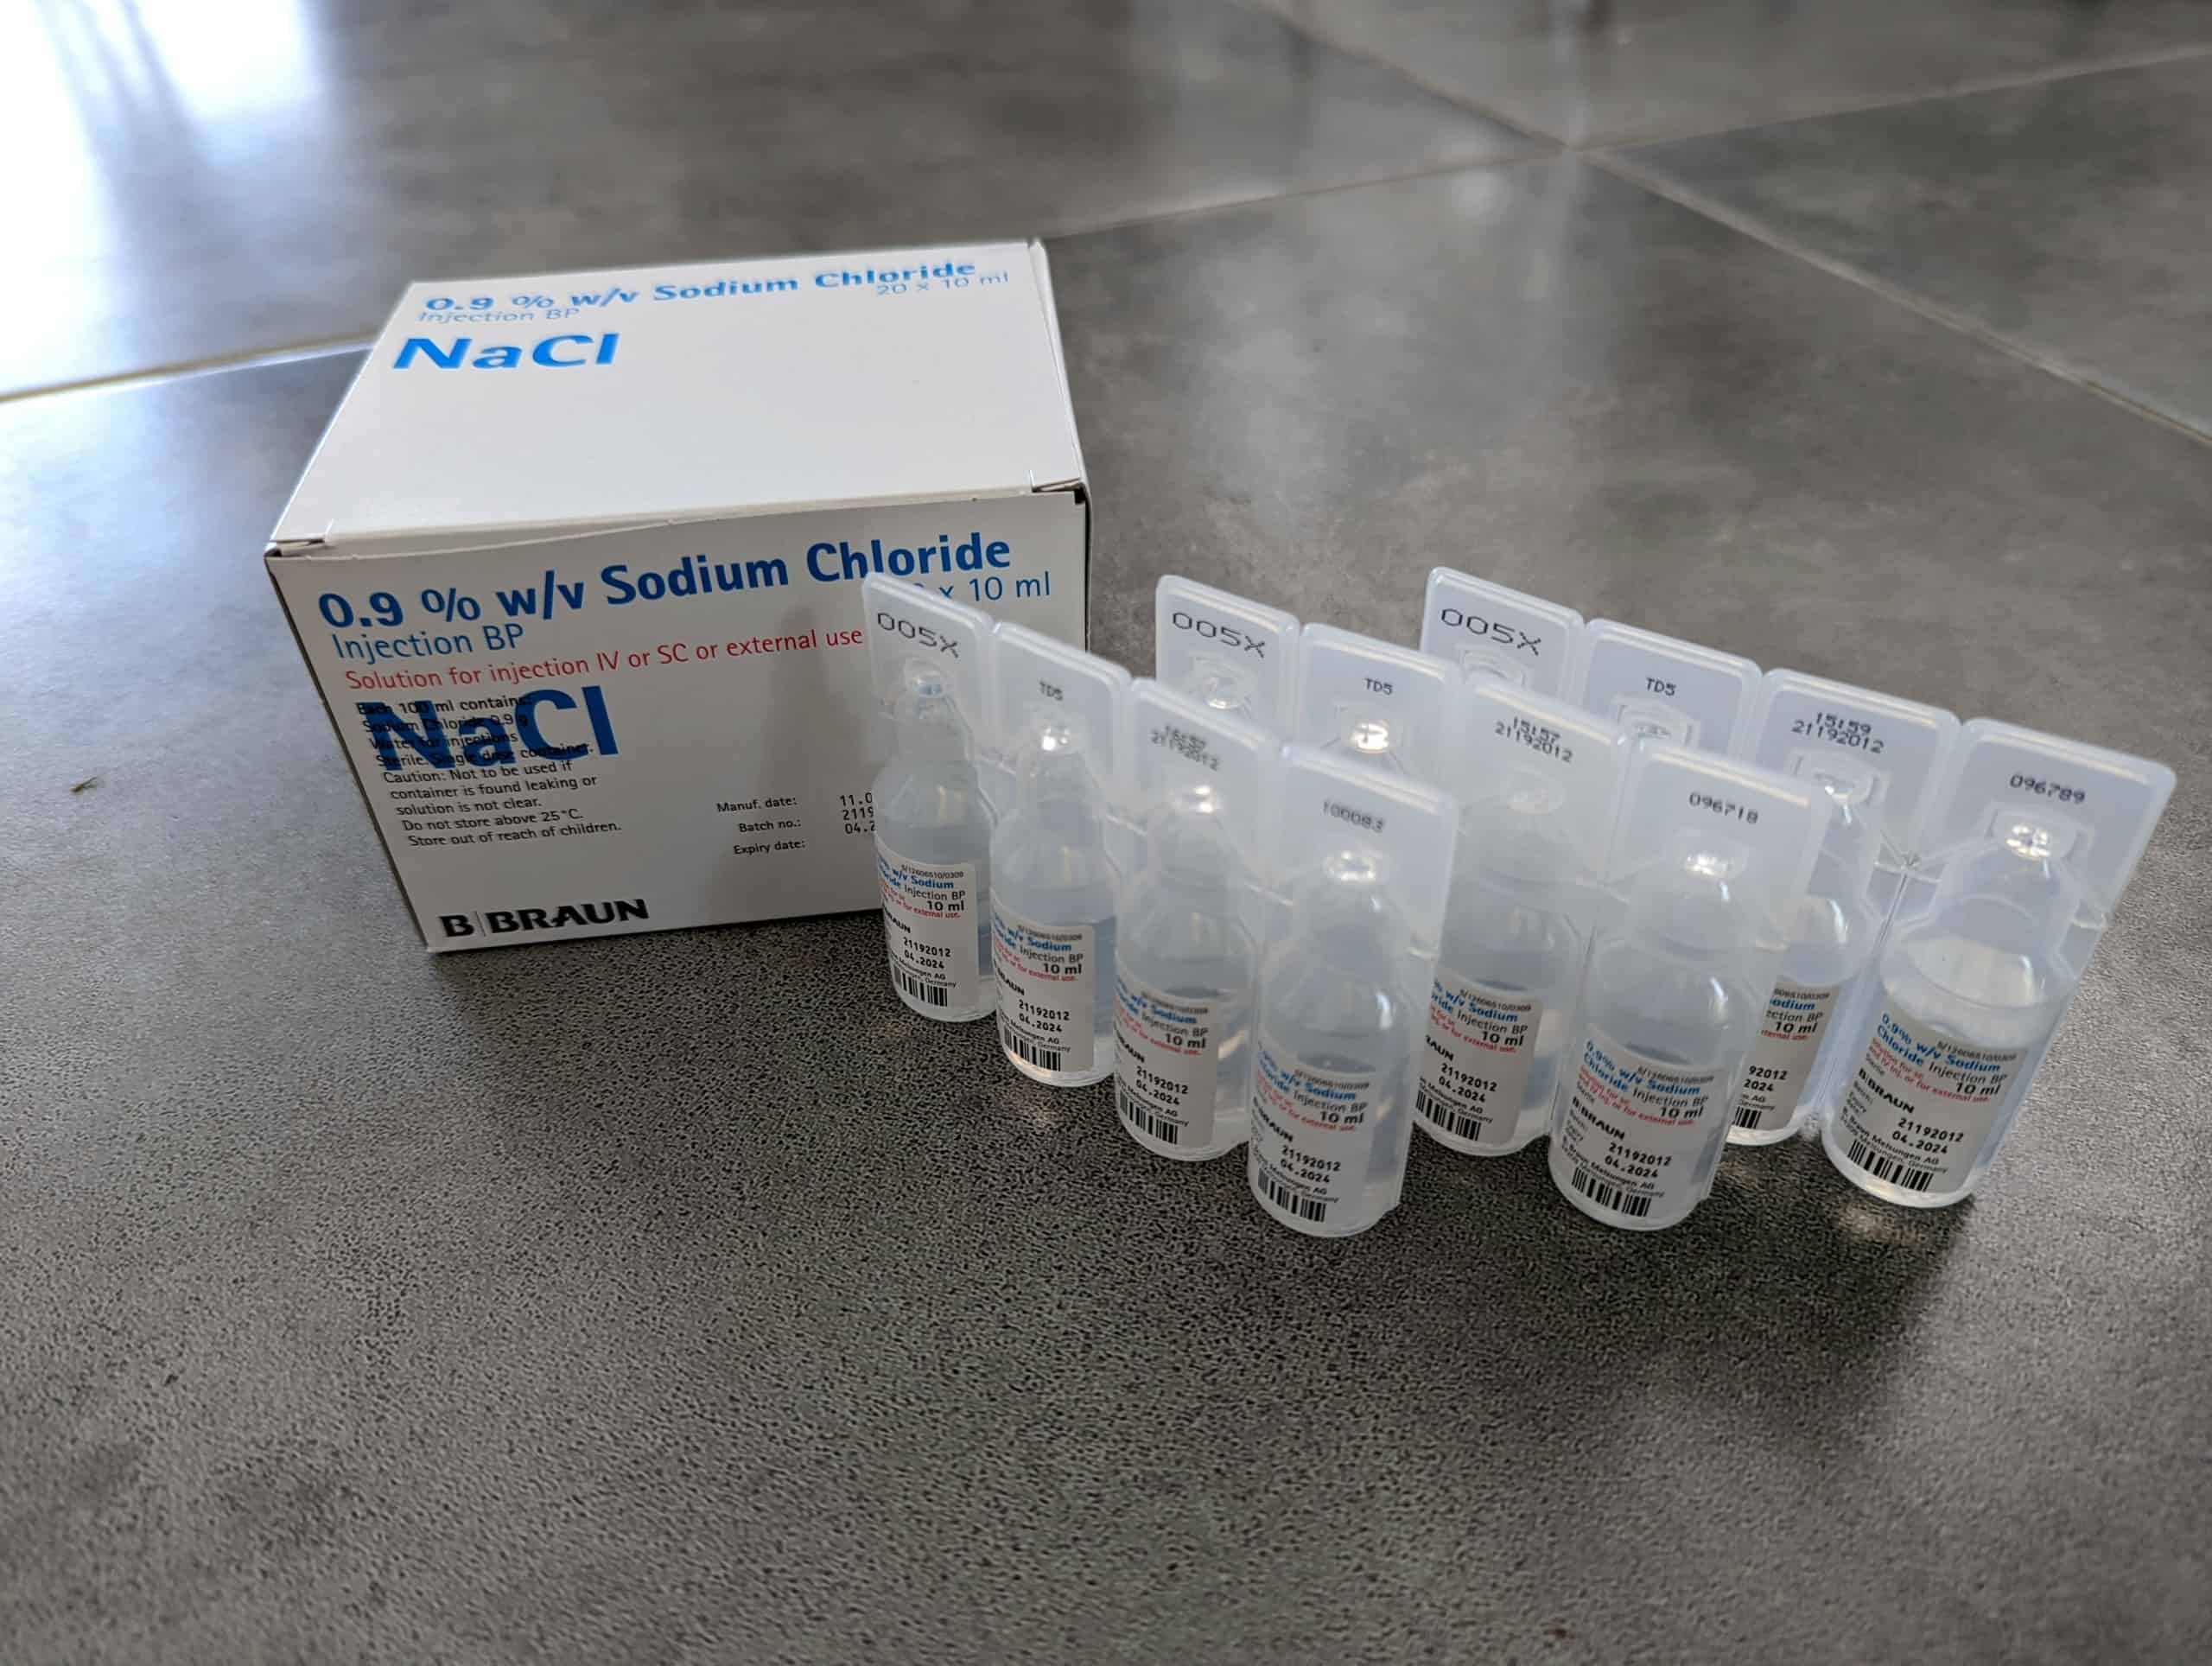 Injectable saline